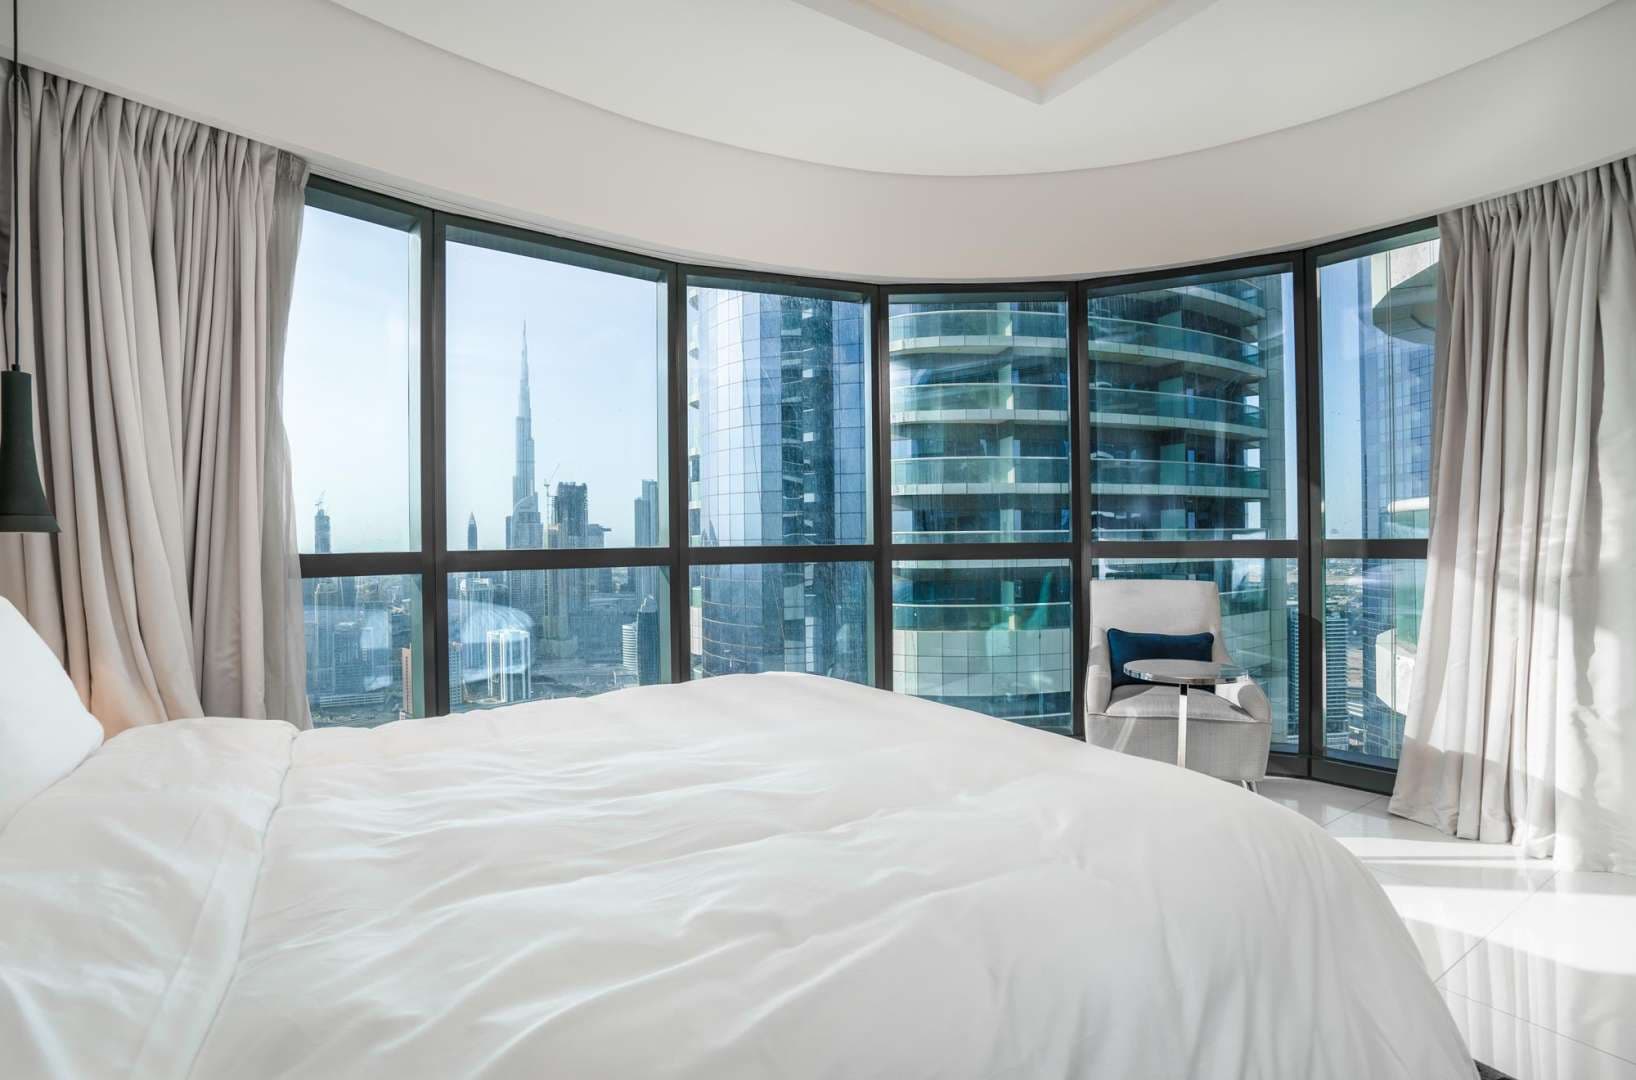 3 Bedroom Apartment For Rent Damac Towers By Paramount Lp06045 999350efbbb0800.jpg